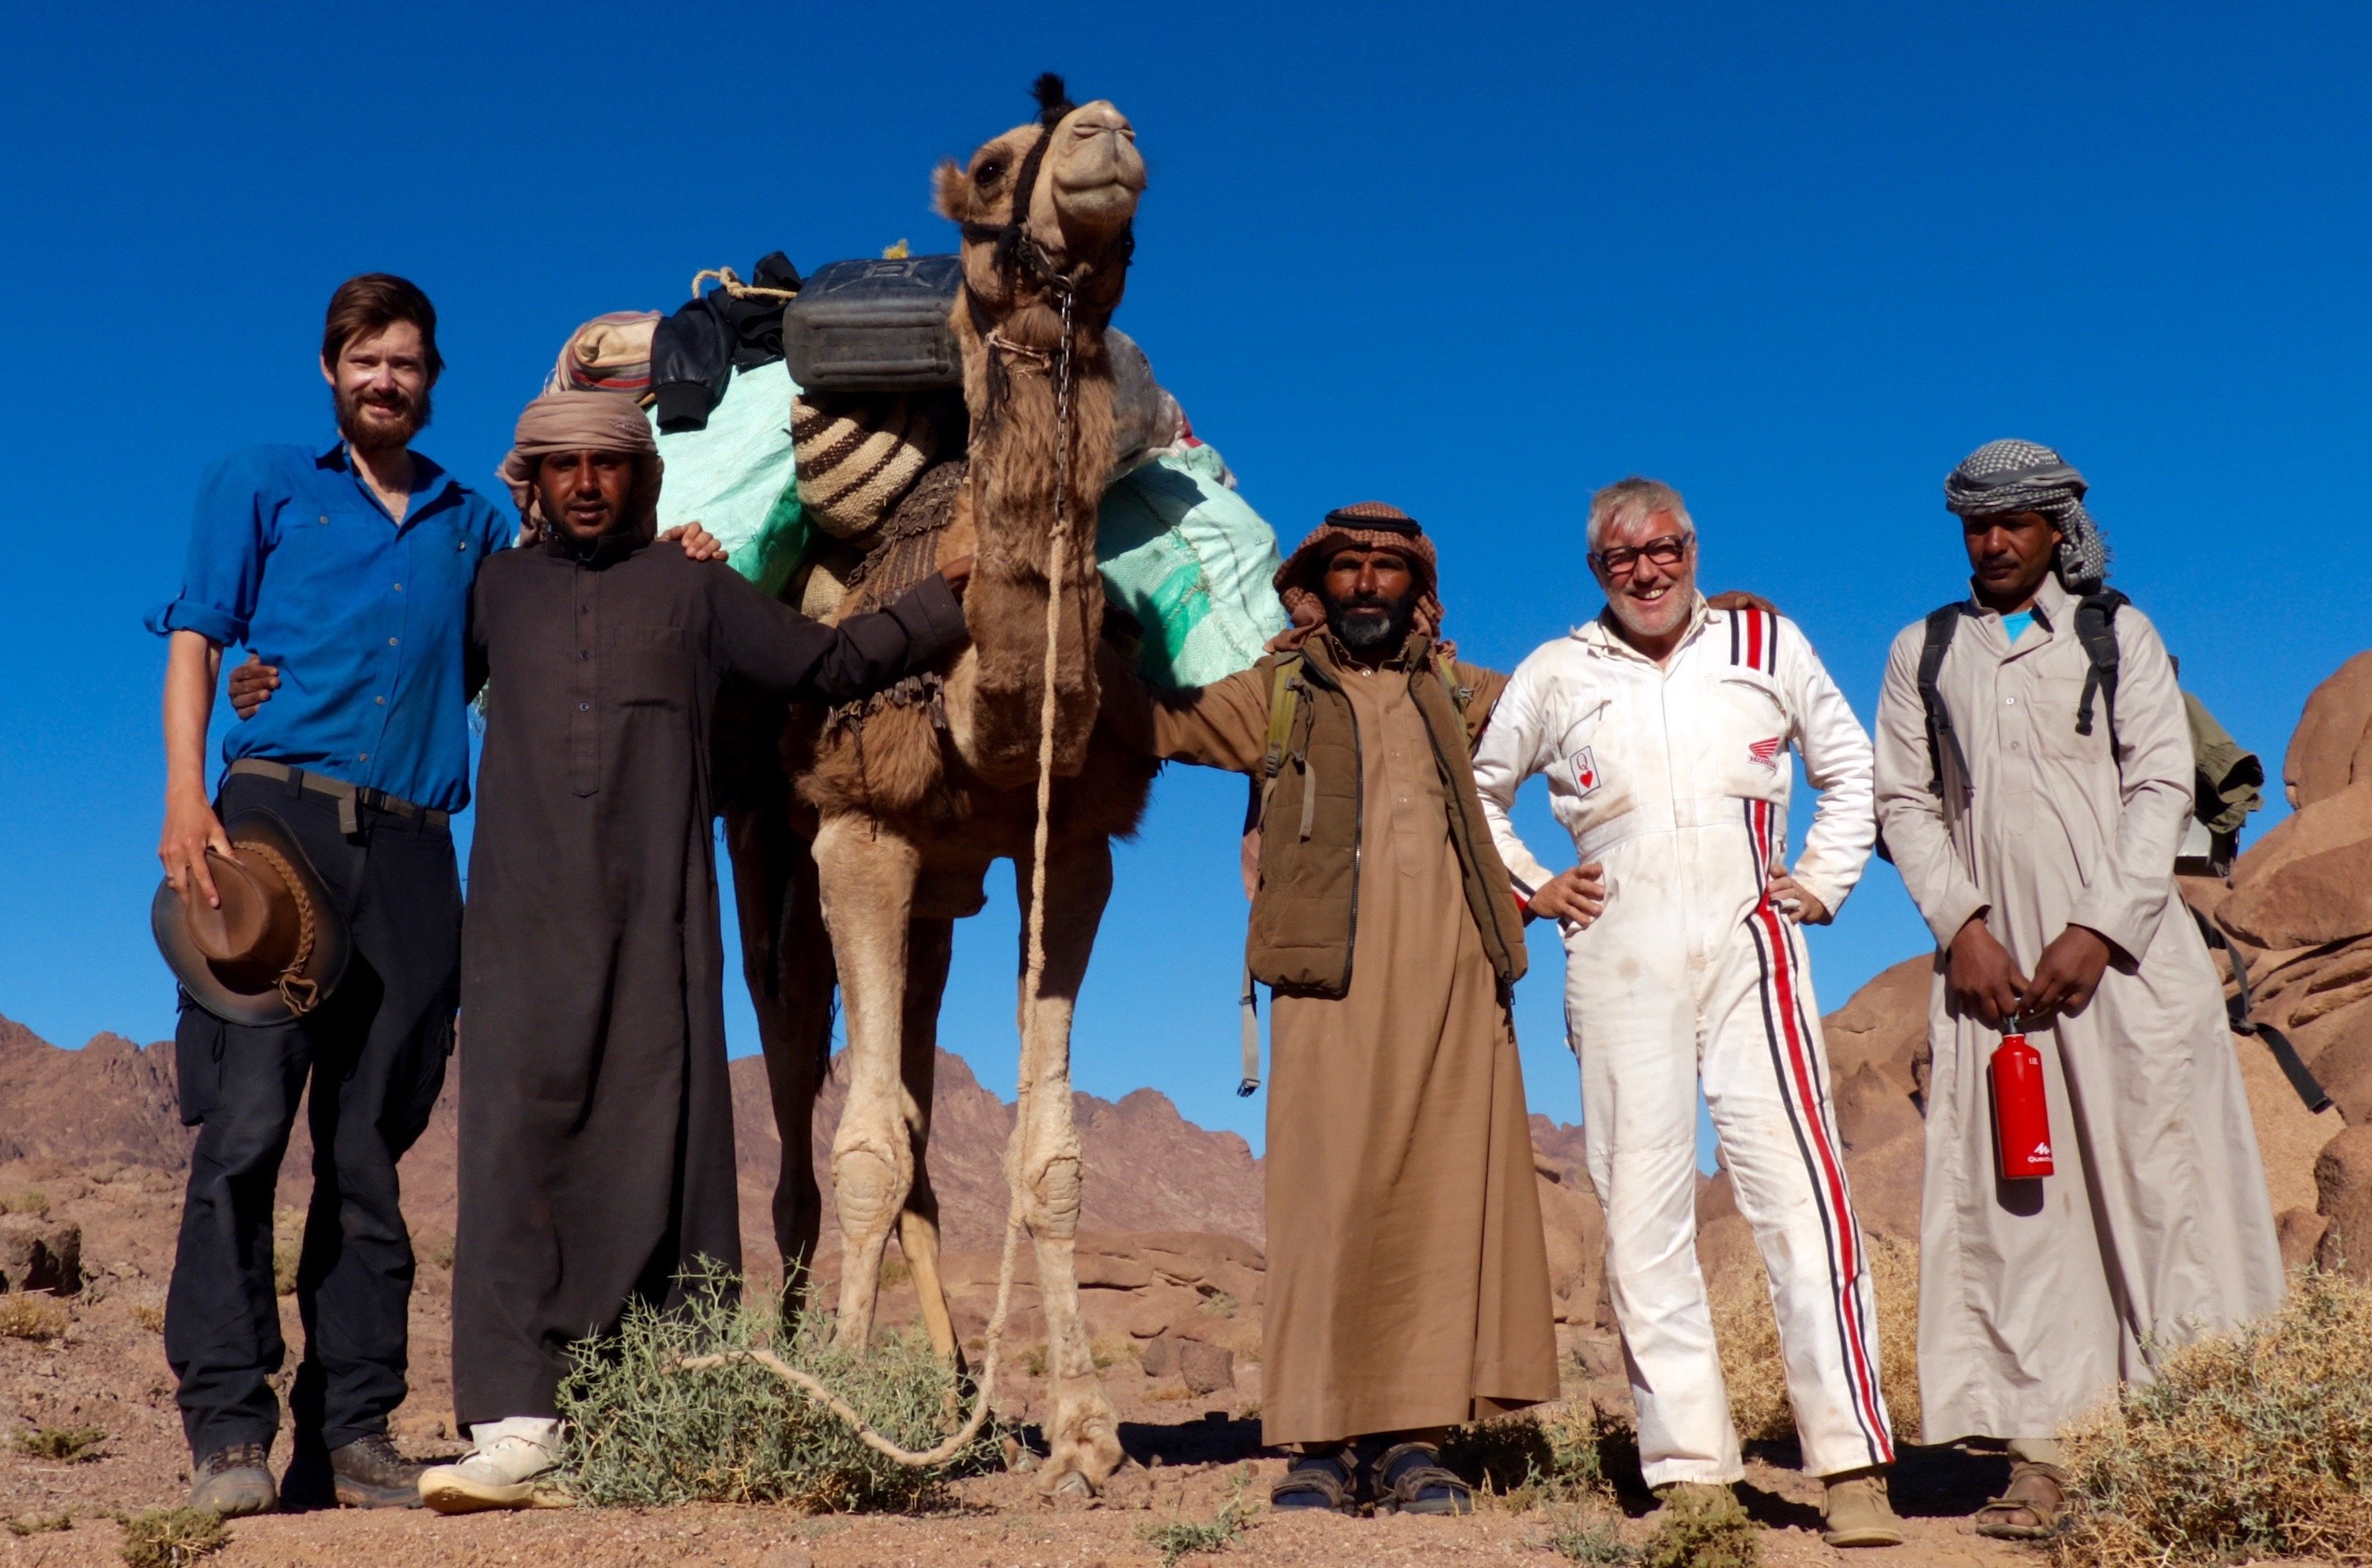 A group pose with a camel in the desert of Jordan.